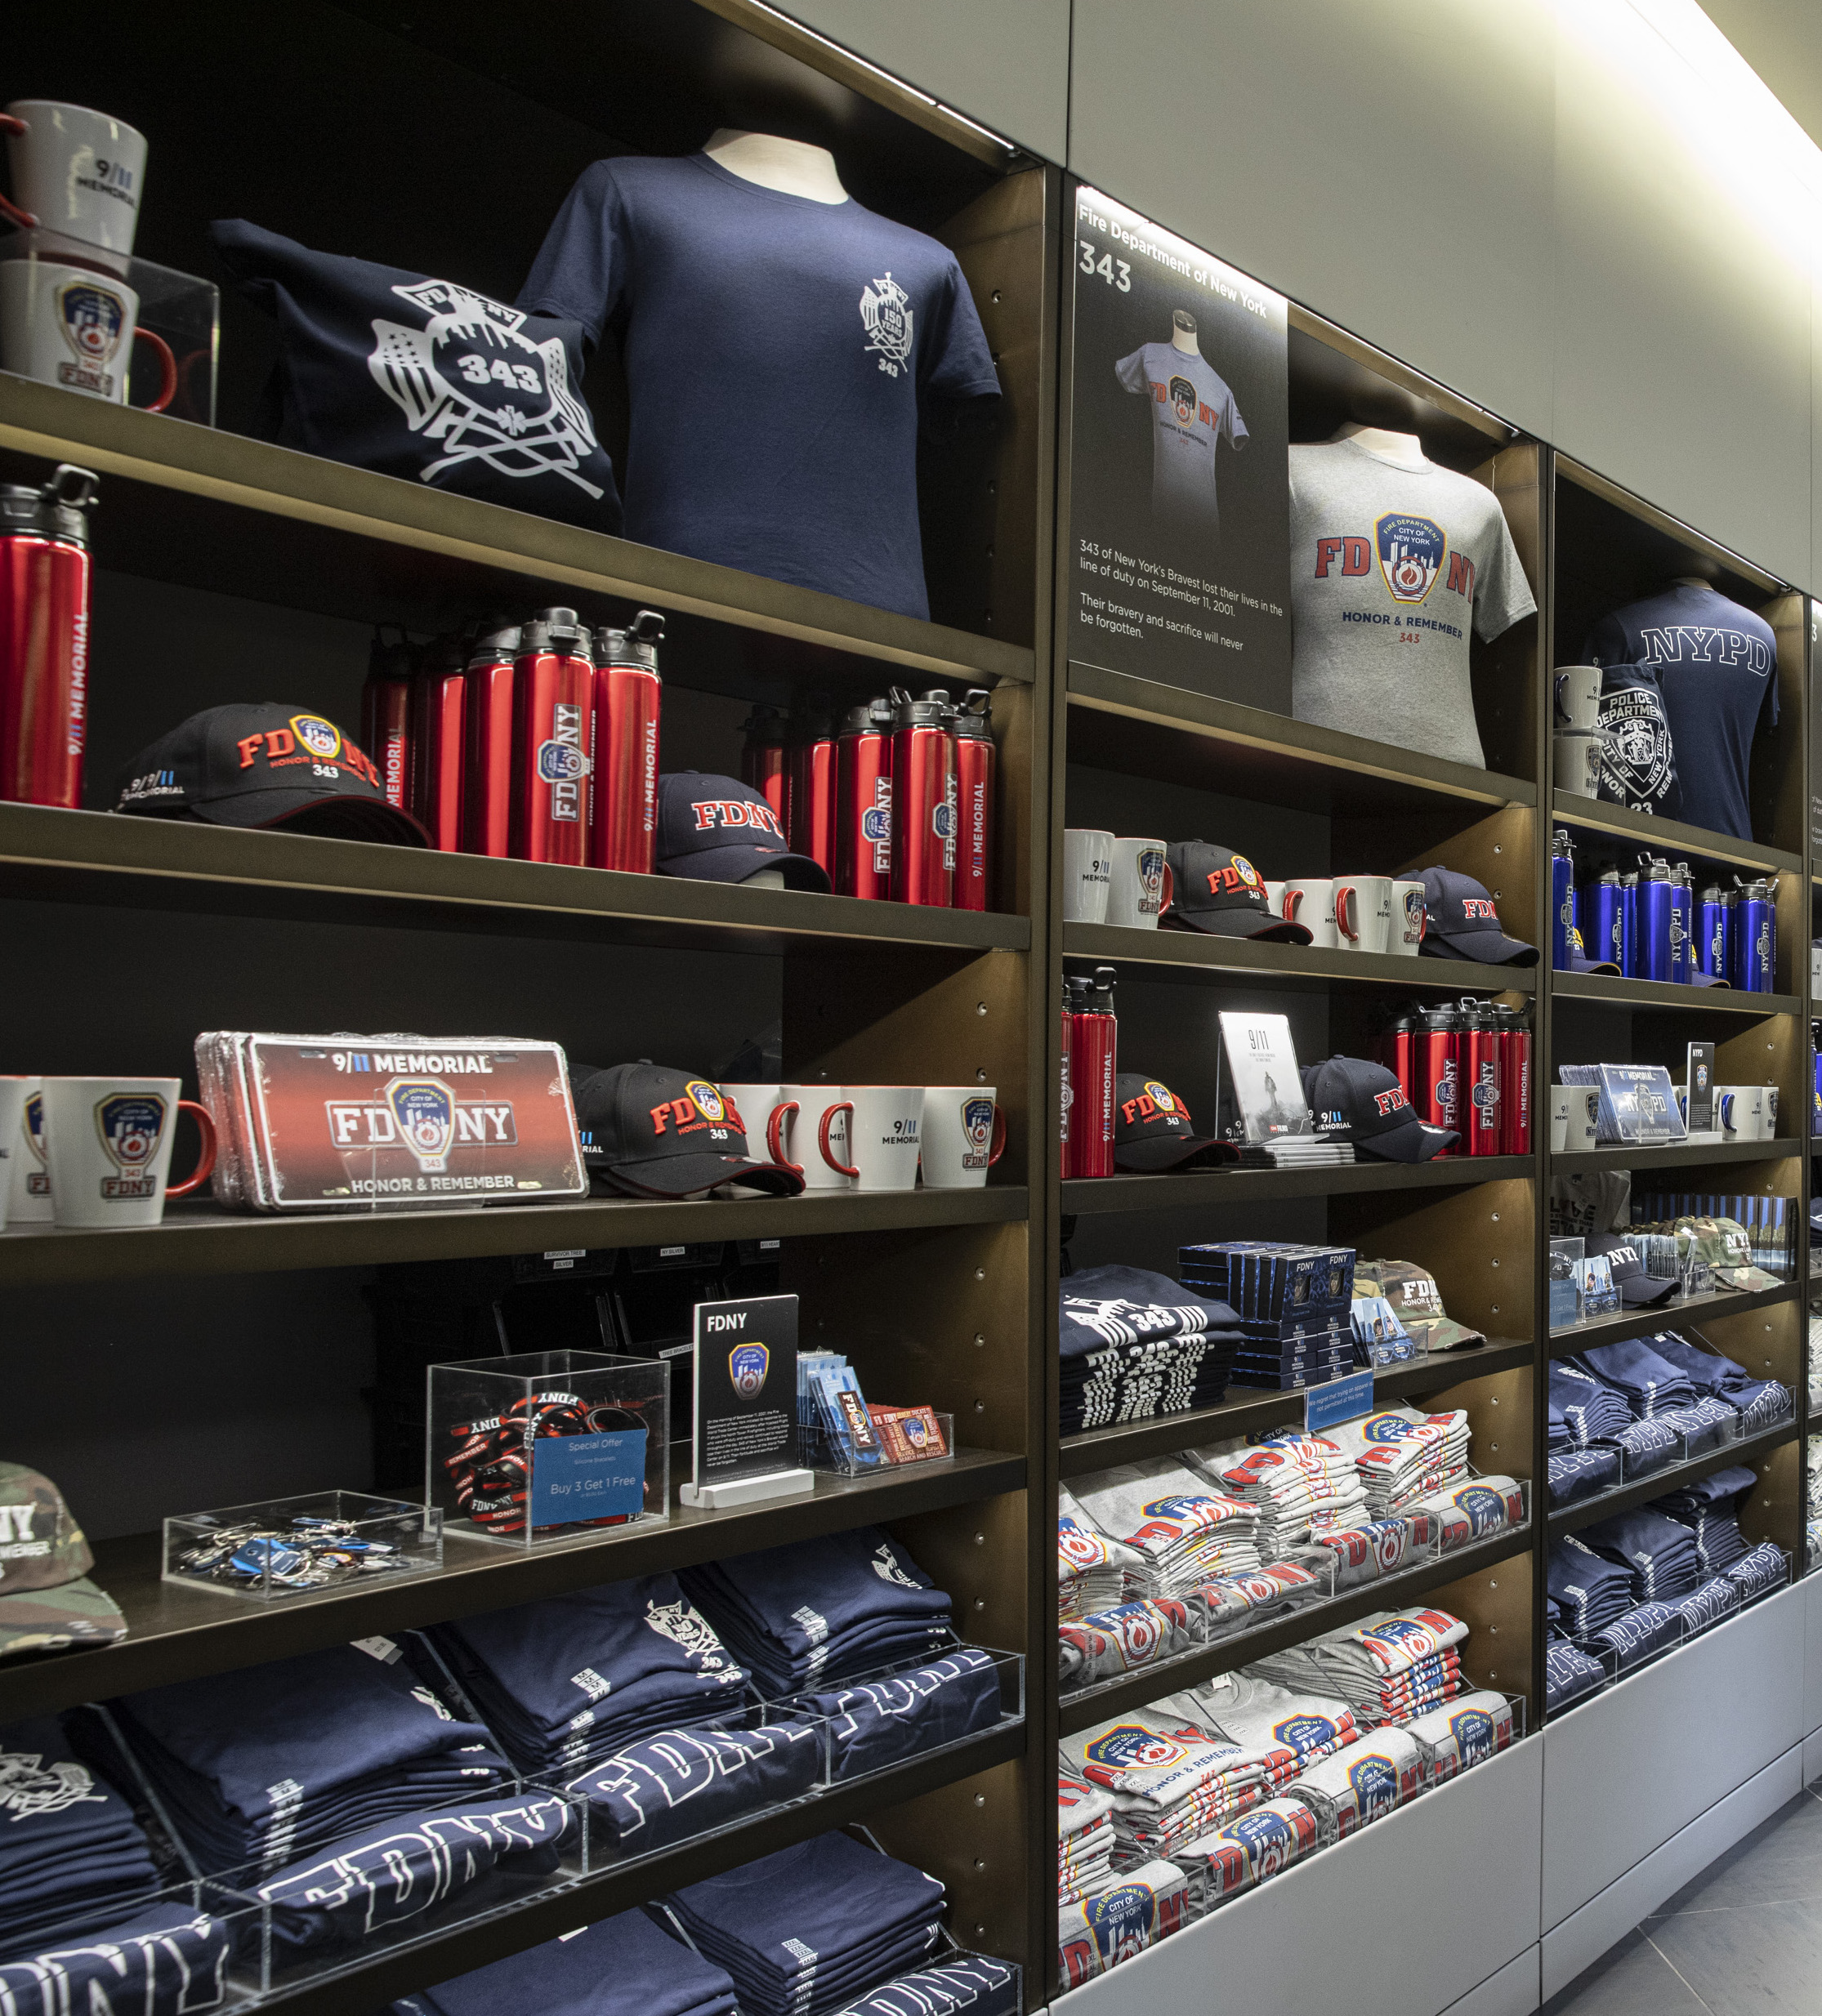 The 9/11 museum's absurd gift shop